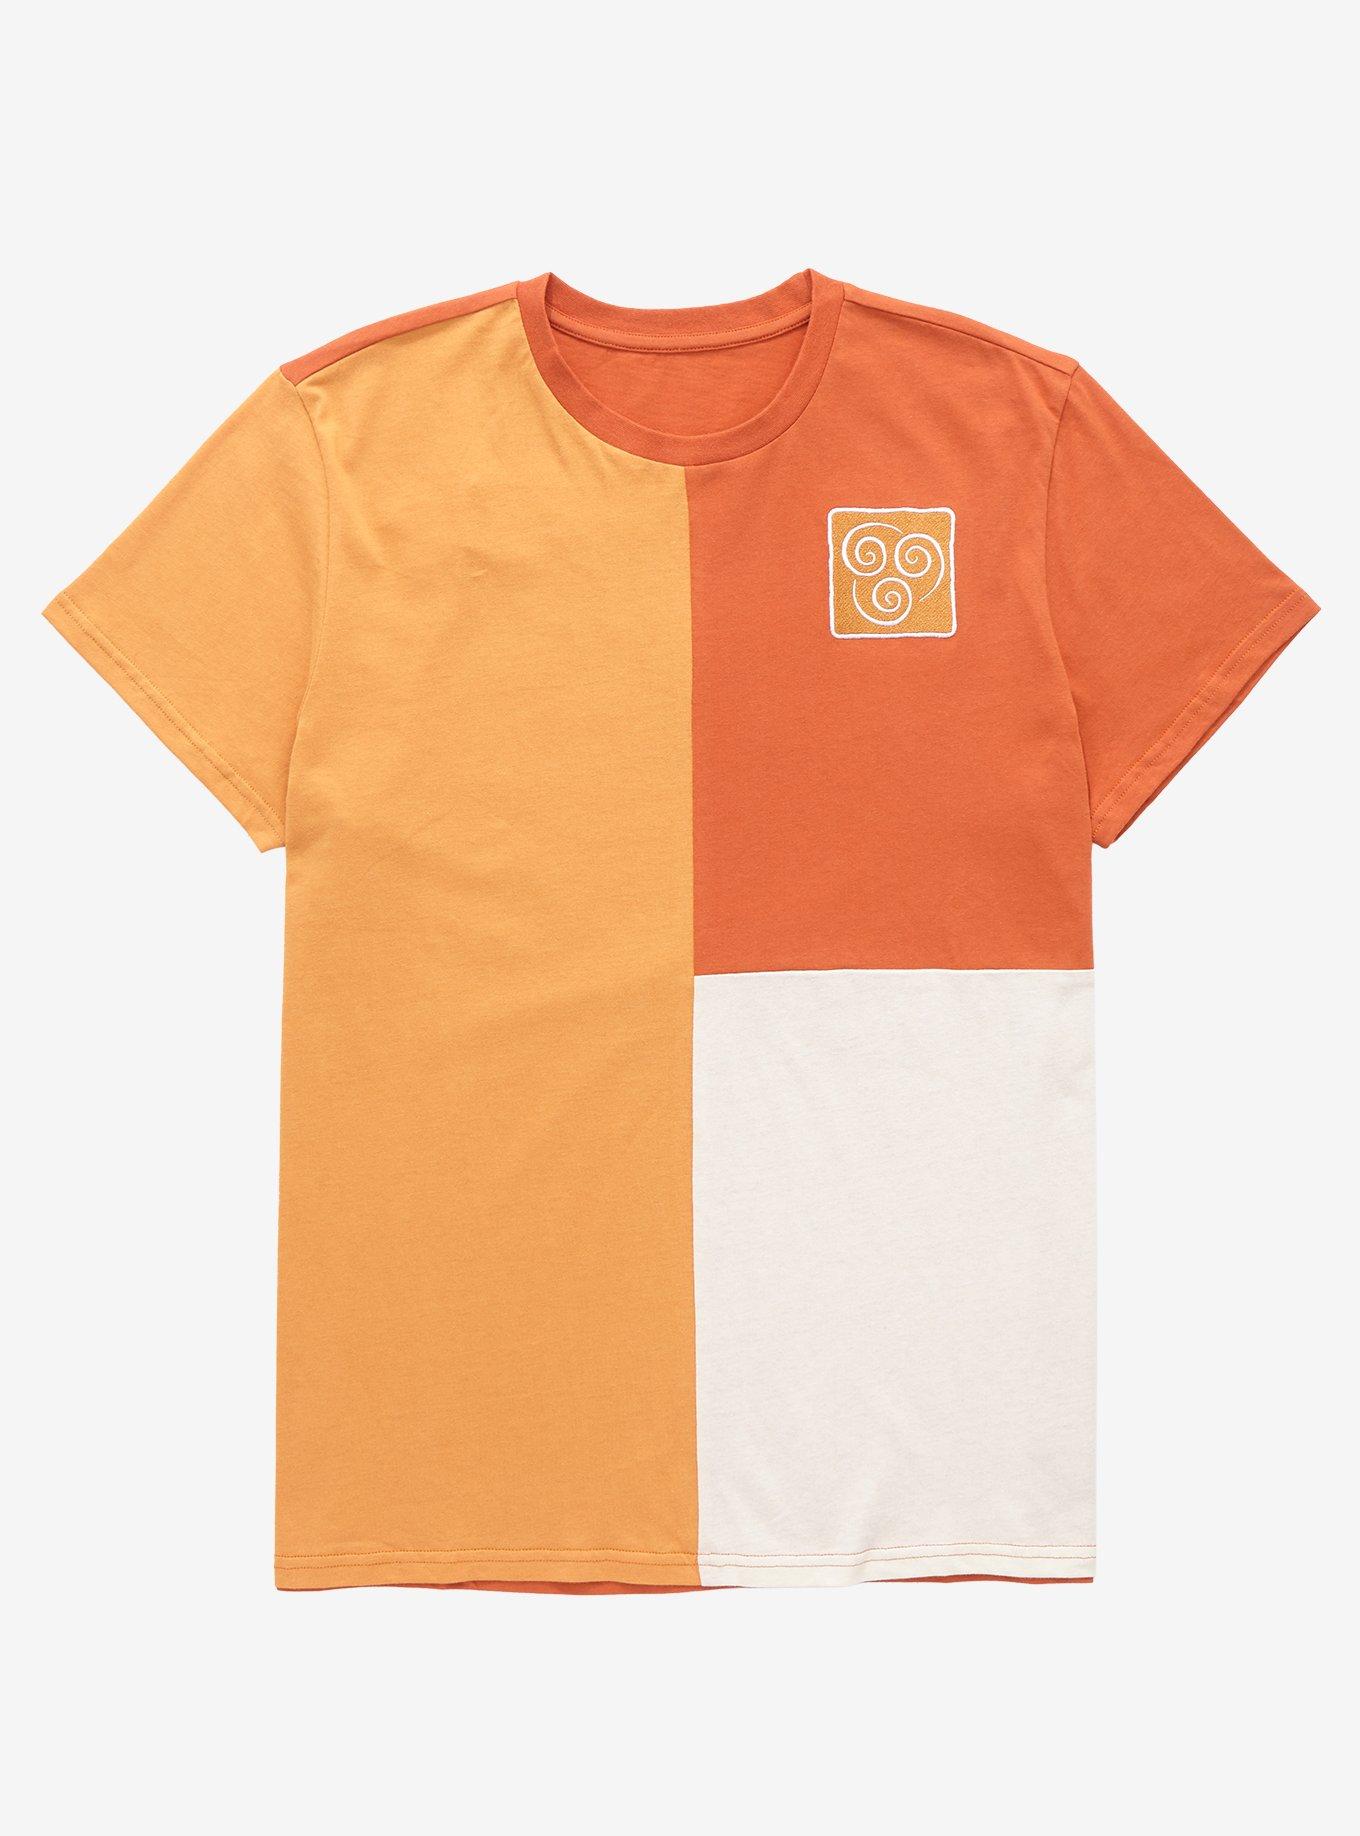 OFFICIAL Avatar The Last Airbender T-Shirts and Merchandise | BoxLunch